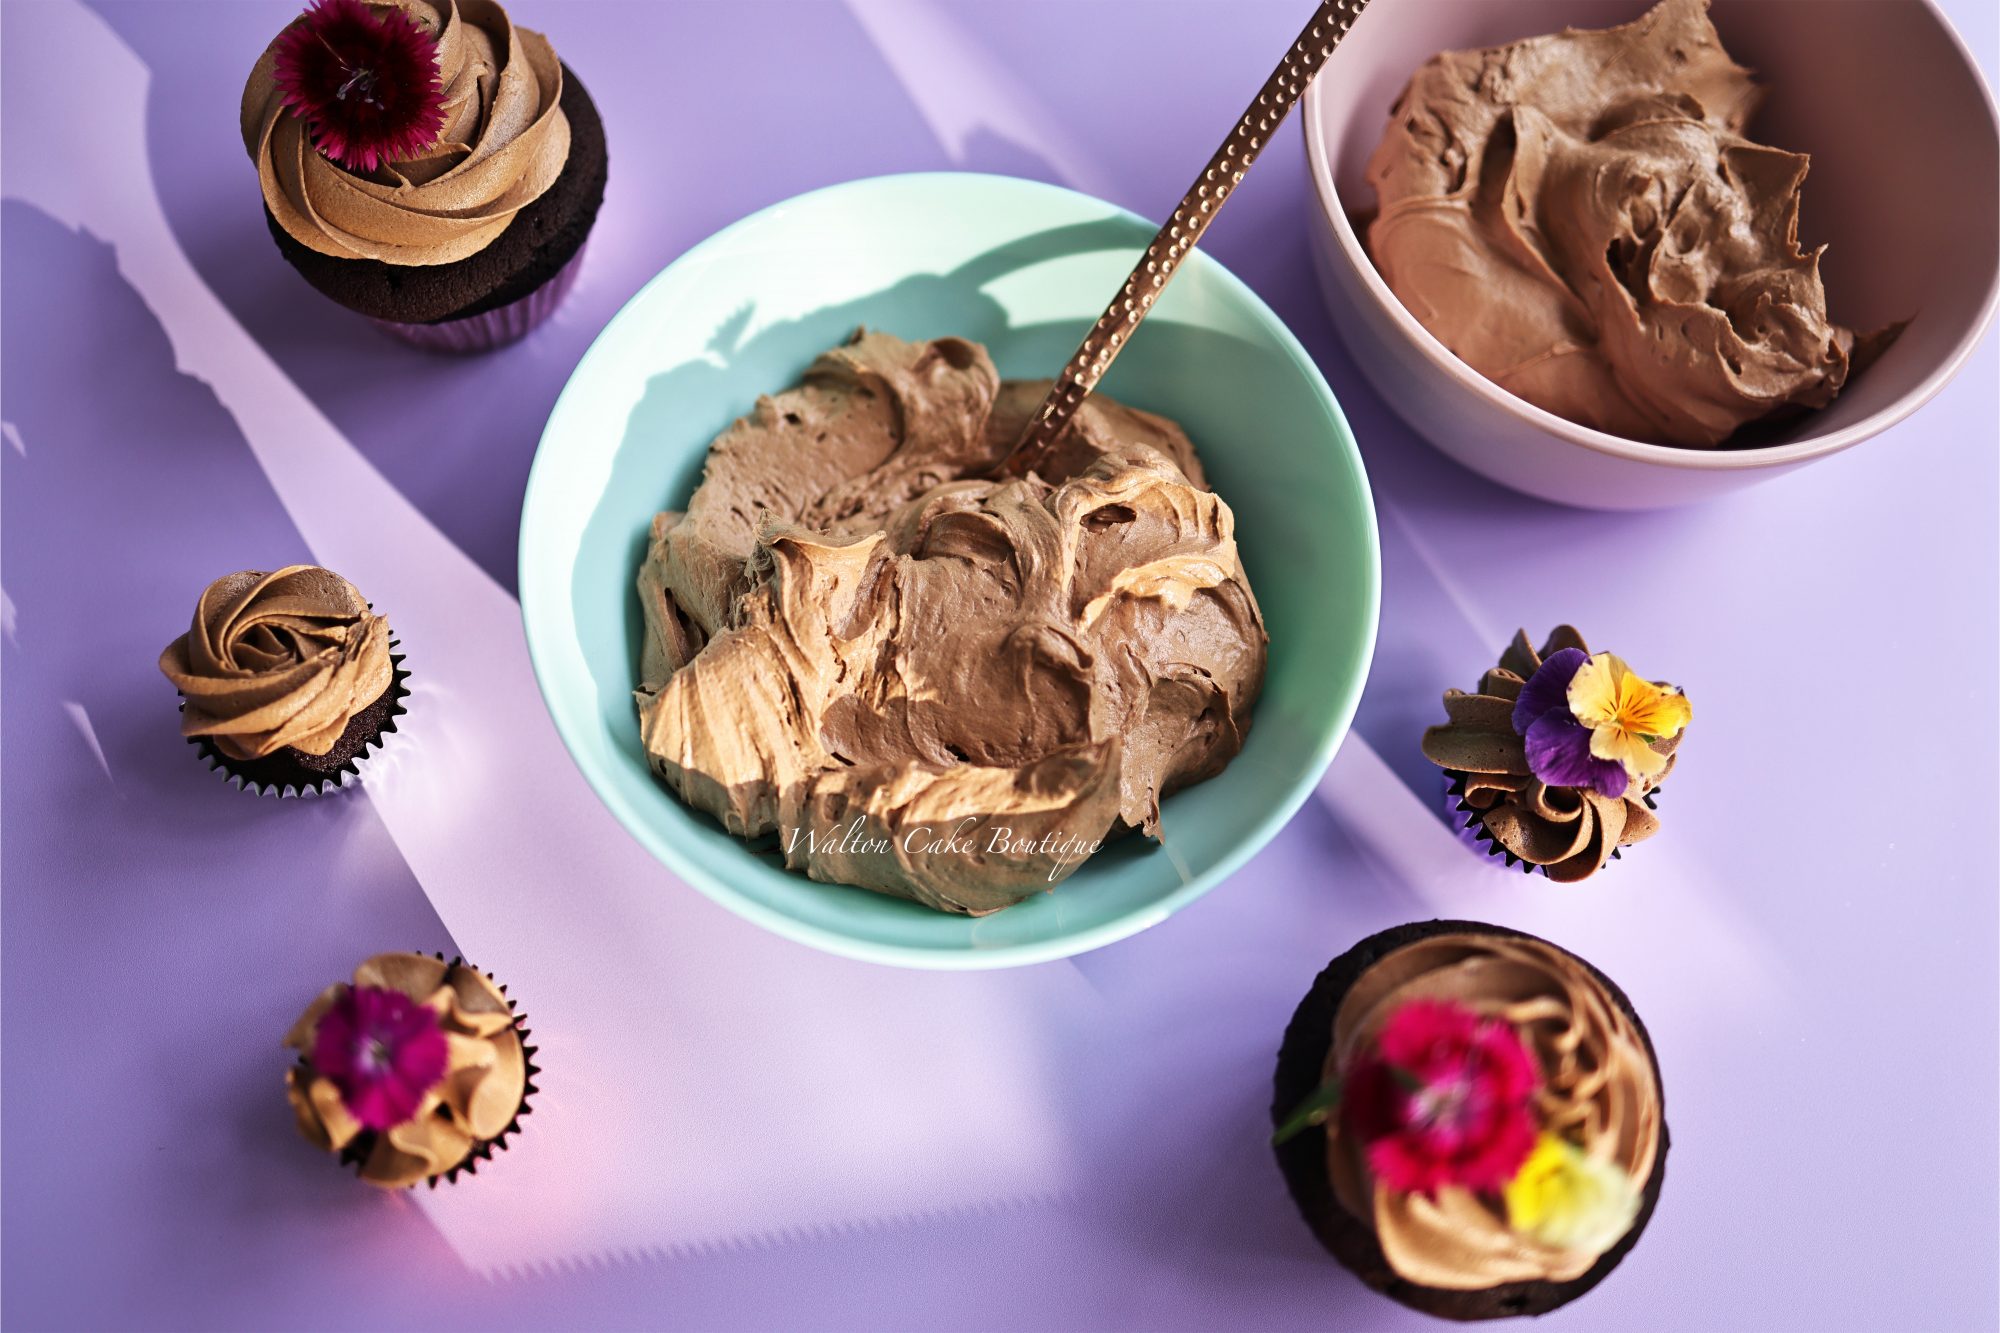 How to make a delicious Chocolate Buttercream Frosting